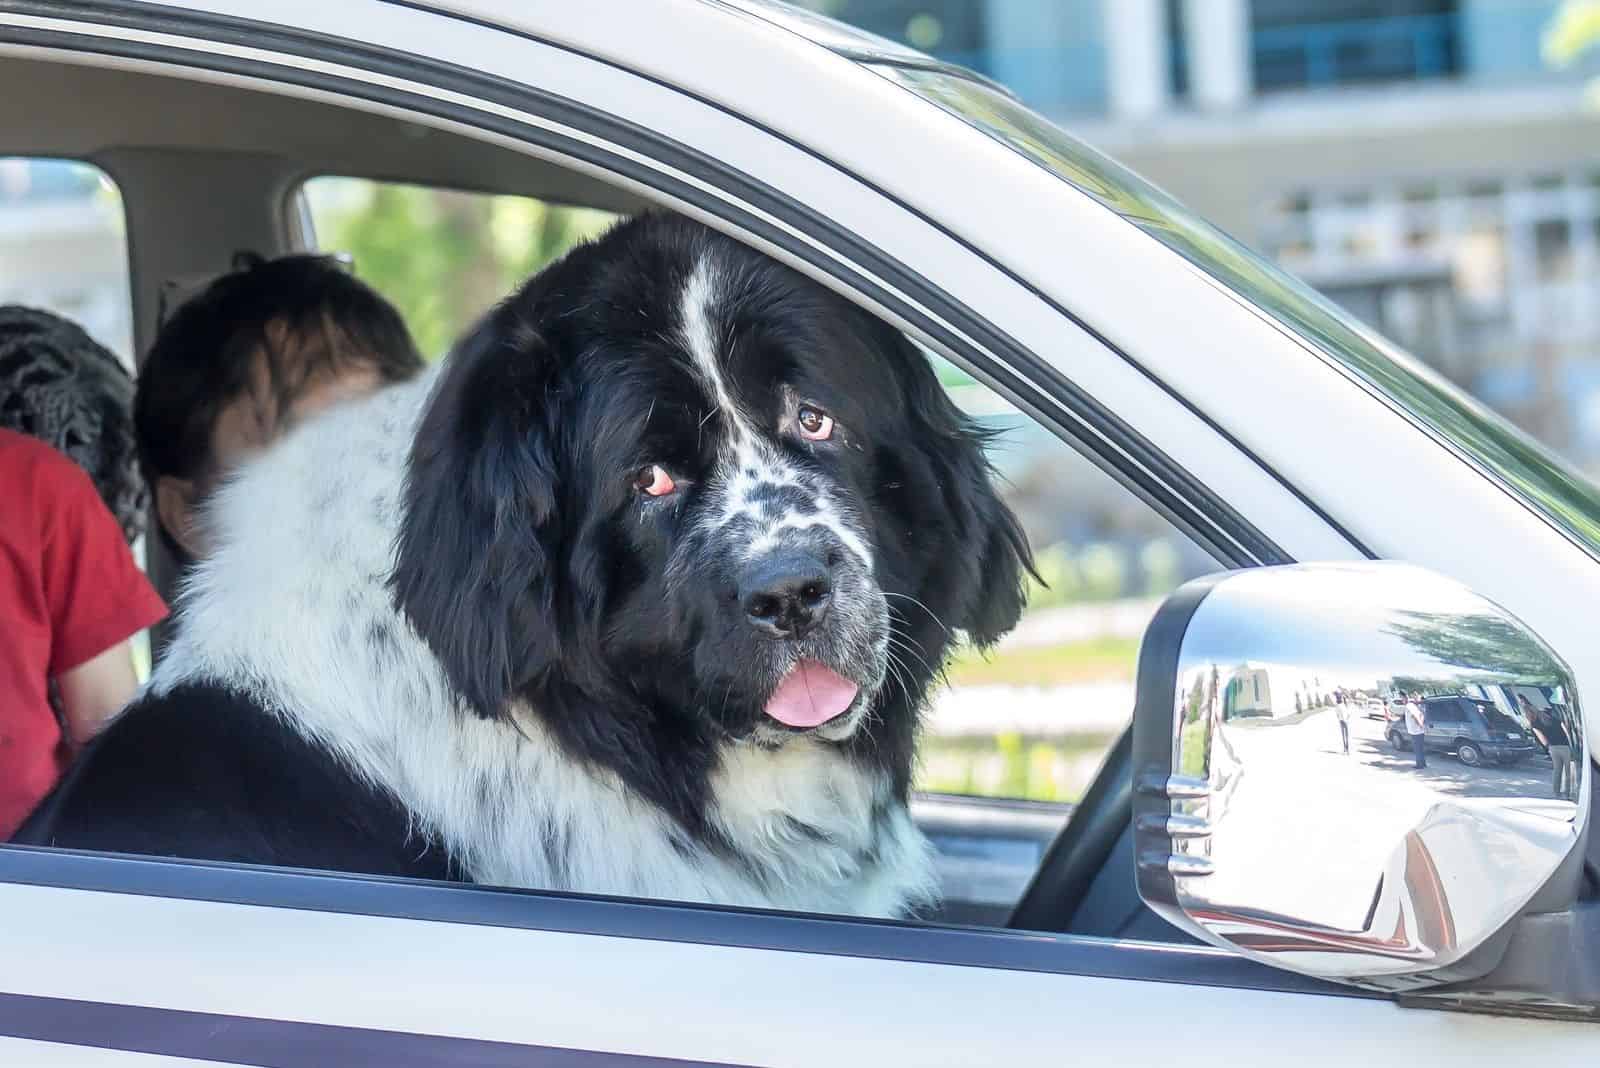 newfoundland dog inside the car looking outside the window